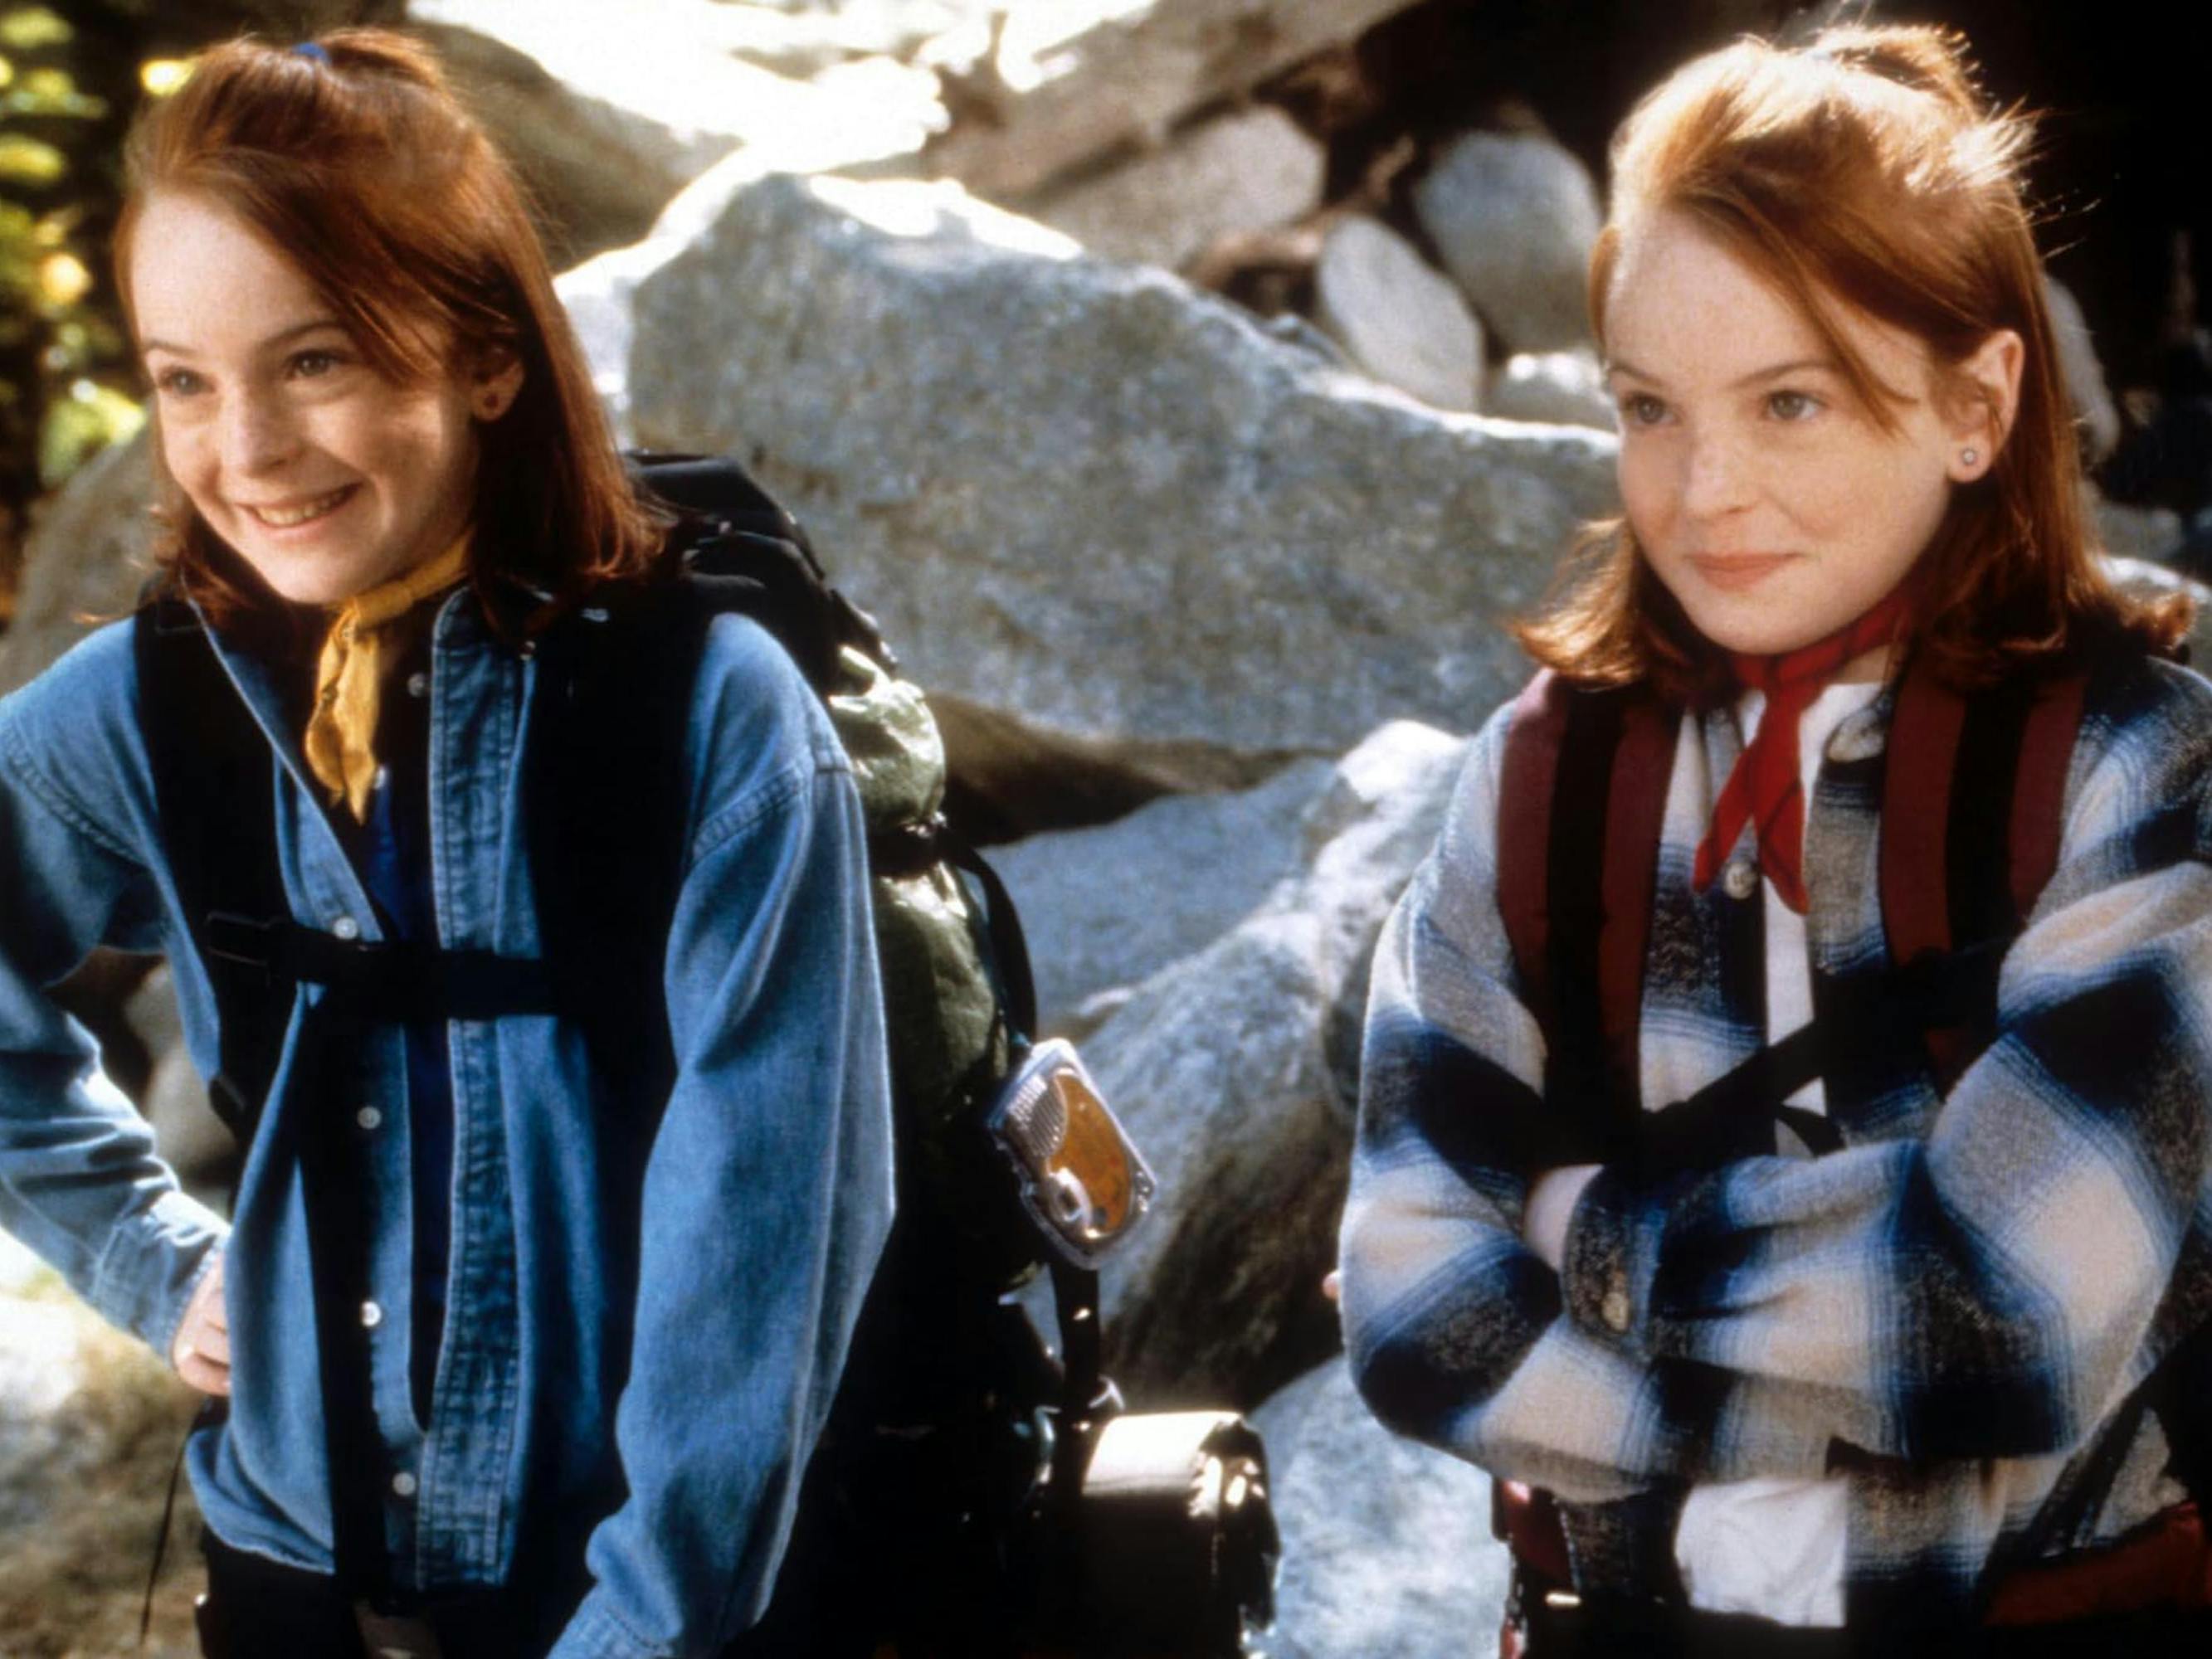 Halle Parker (Lindsay Lohan) and Annie James (Lindsay Lohan) in The Parent Trap. The two girls wear western jackets with adorable bandanas tied around their neck in this rocky outdoors scene.